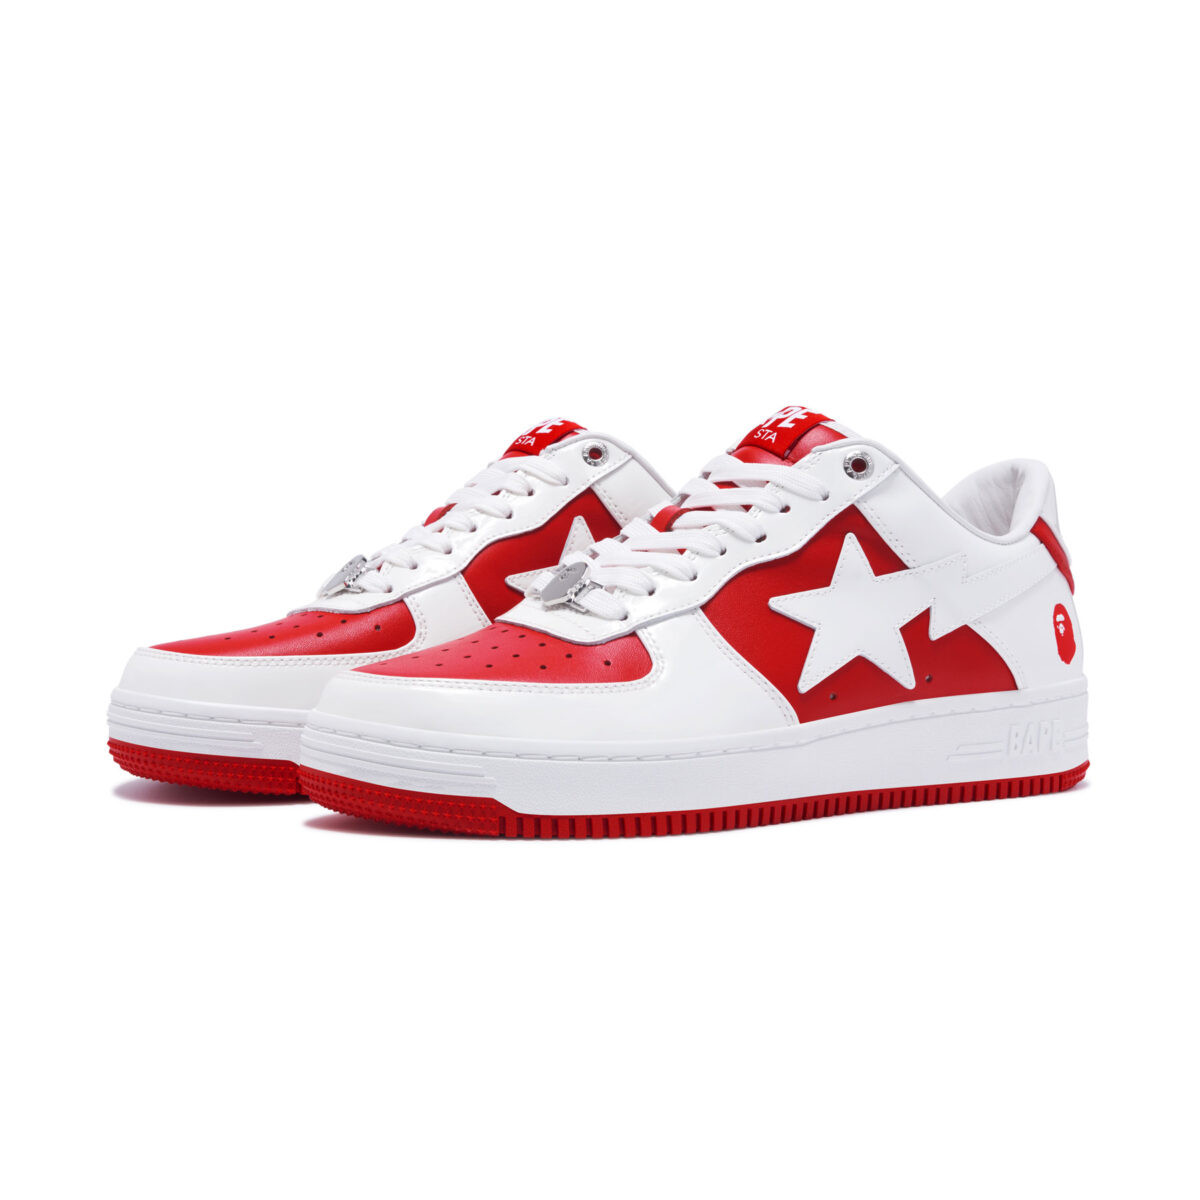 BAPE STA "Patent Leather" Collection